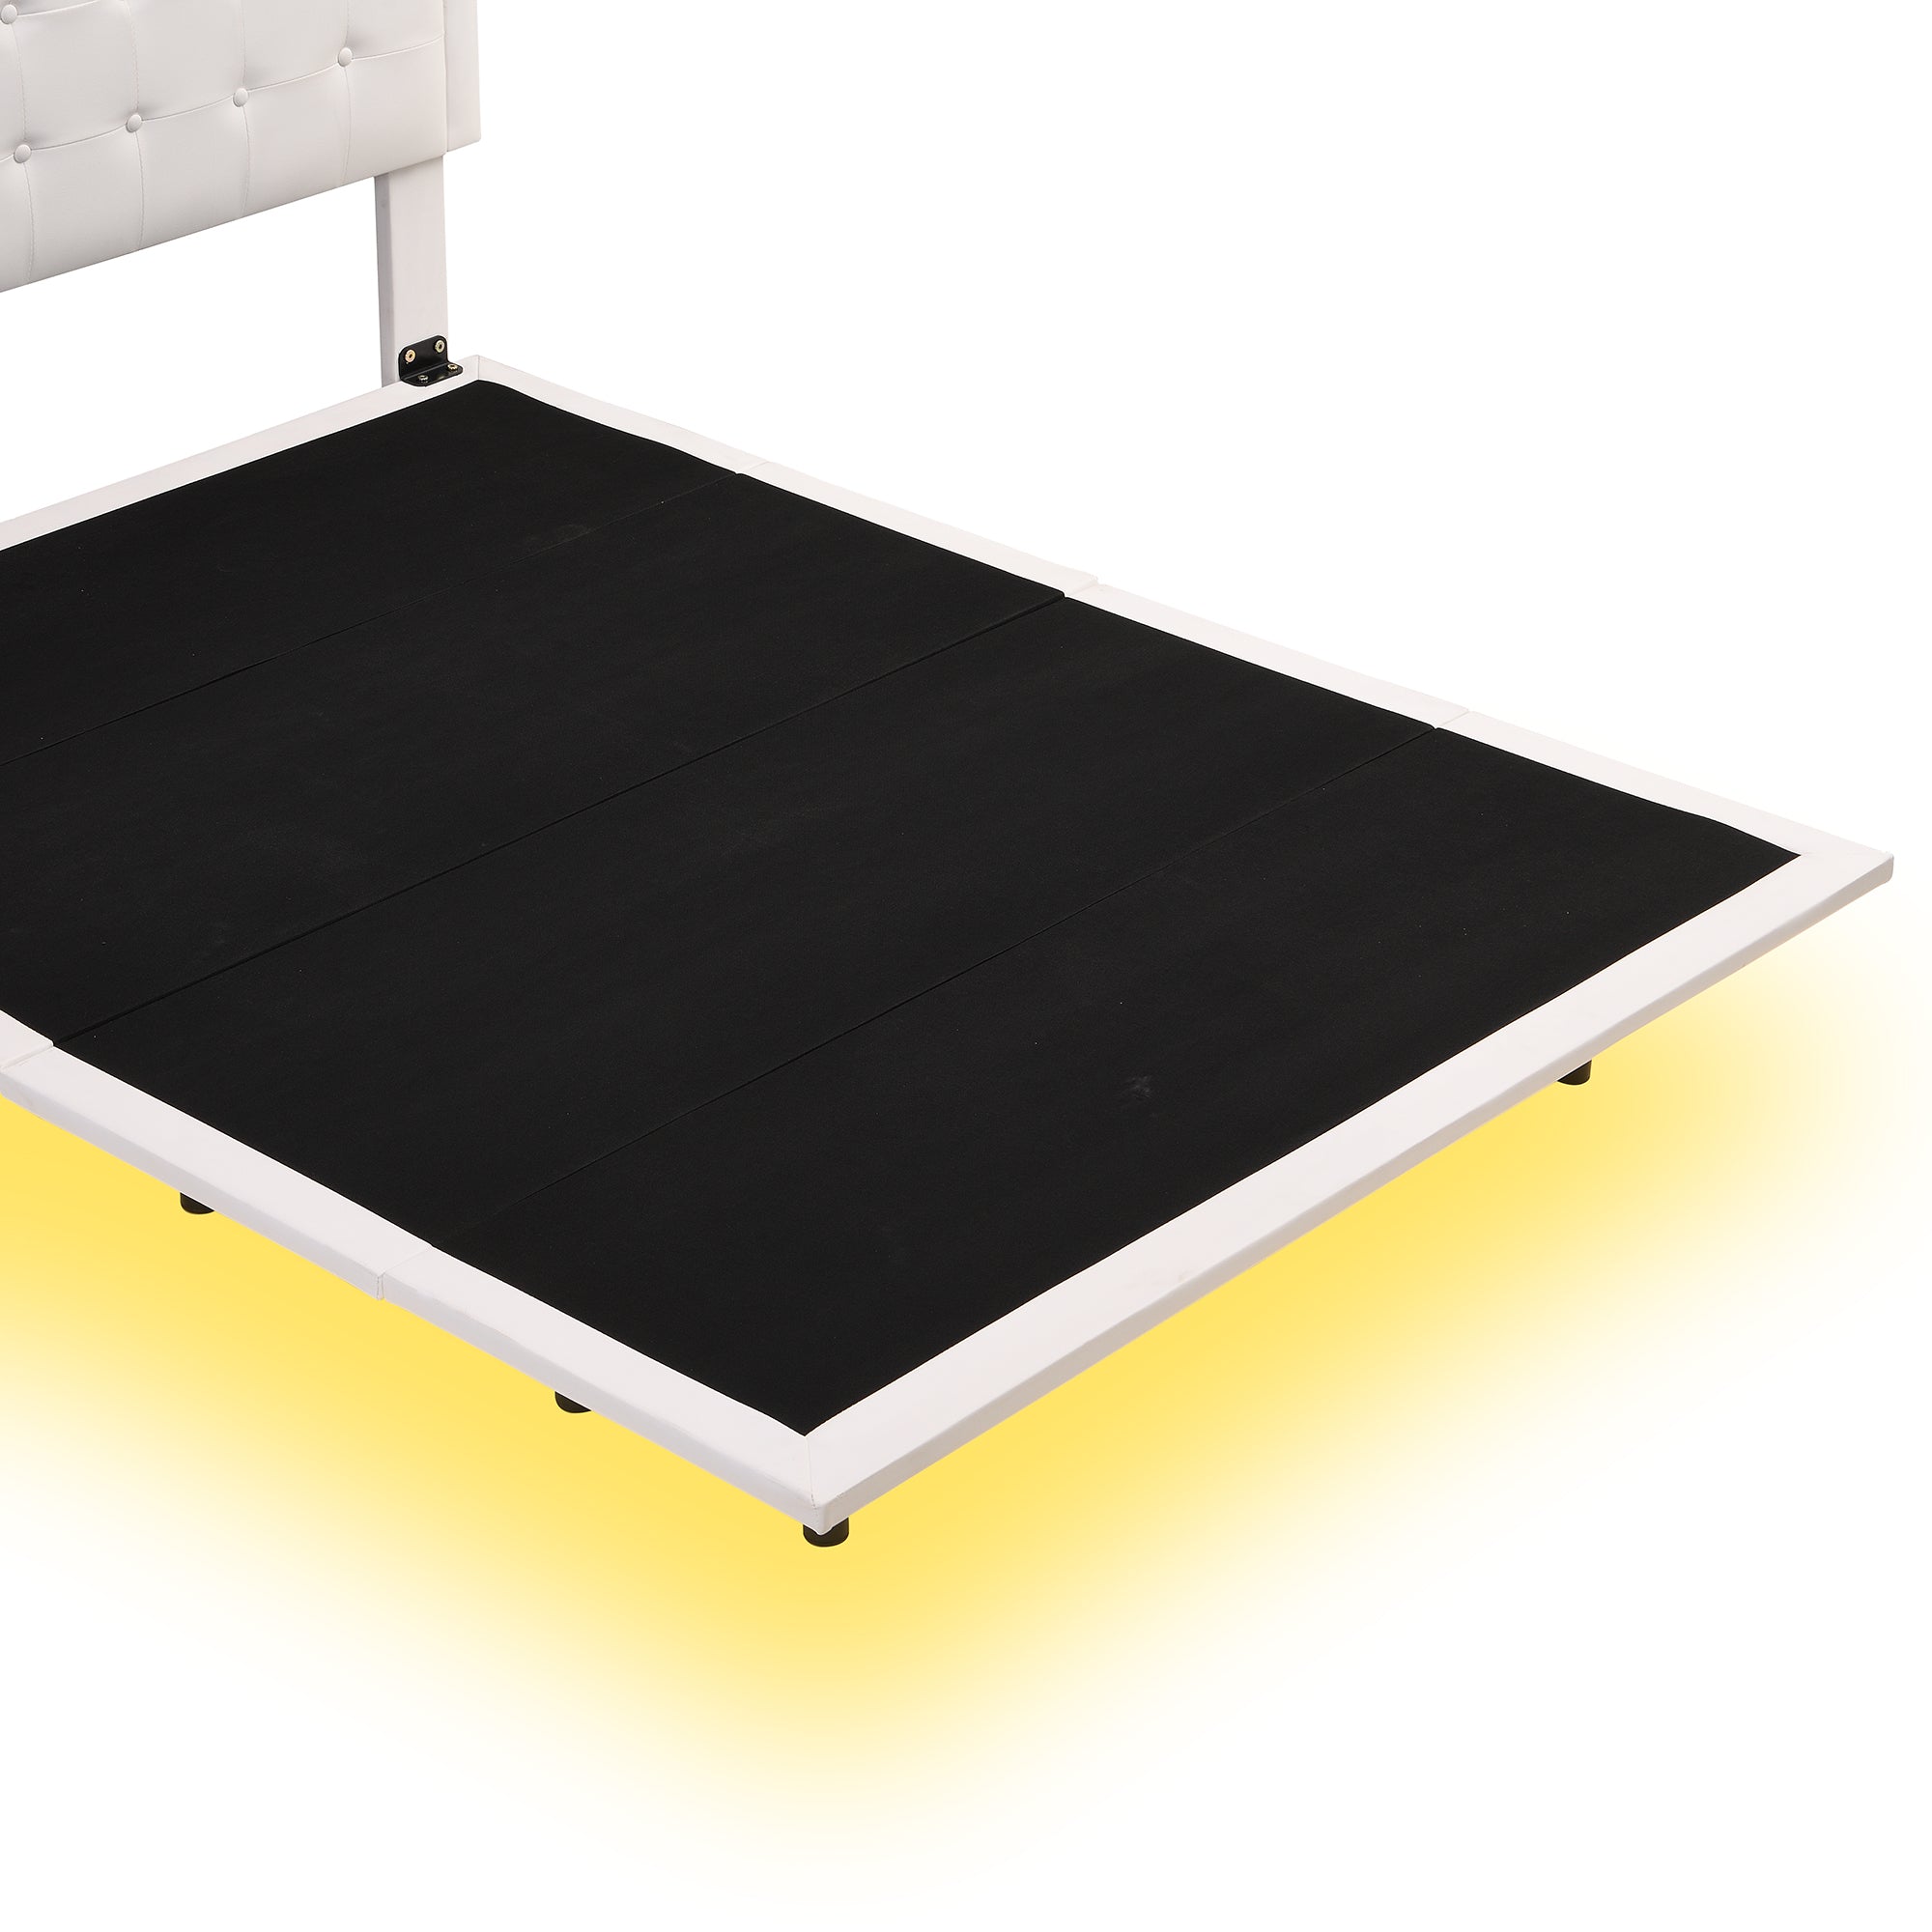 Bellemave® Queen Size Upholstered Button Tufted Platform Bed with Motion Activated Night Lights Bellemave®